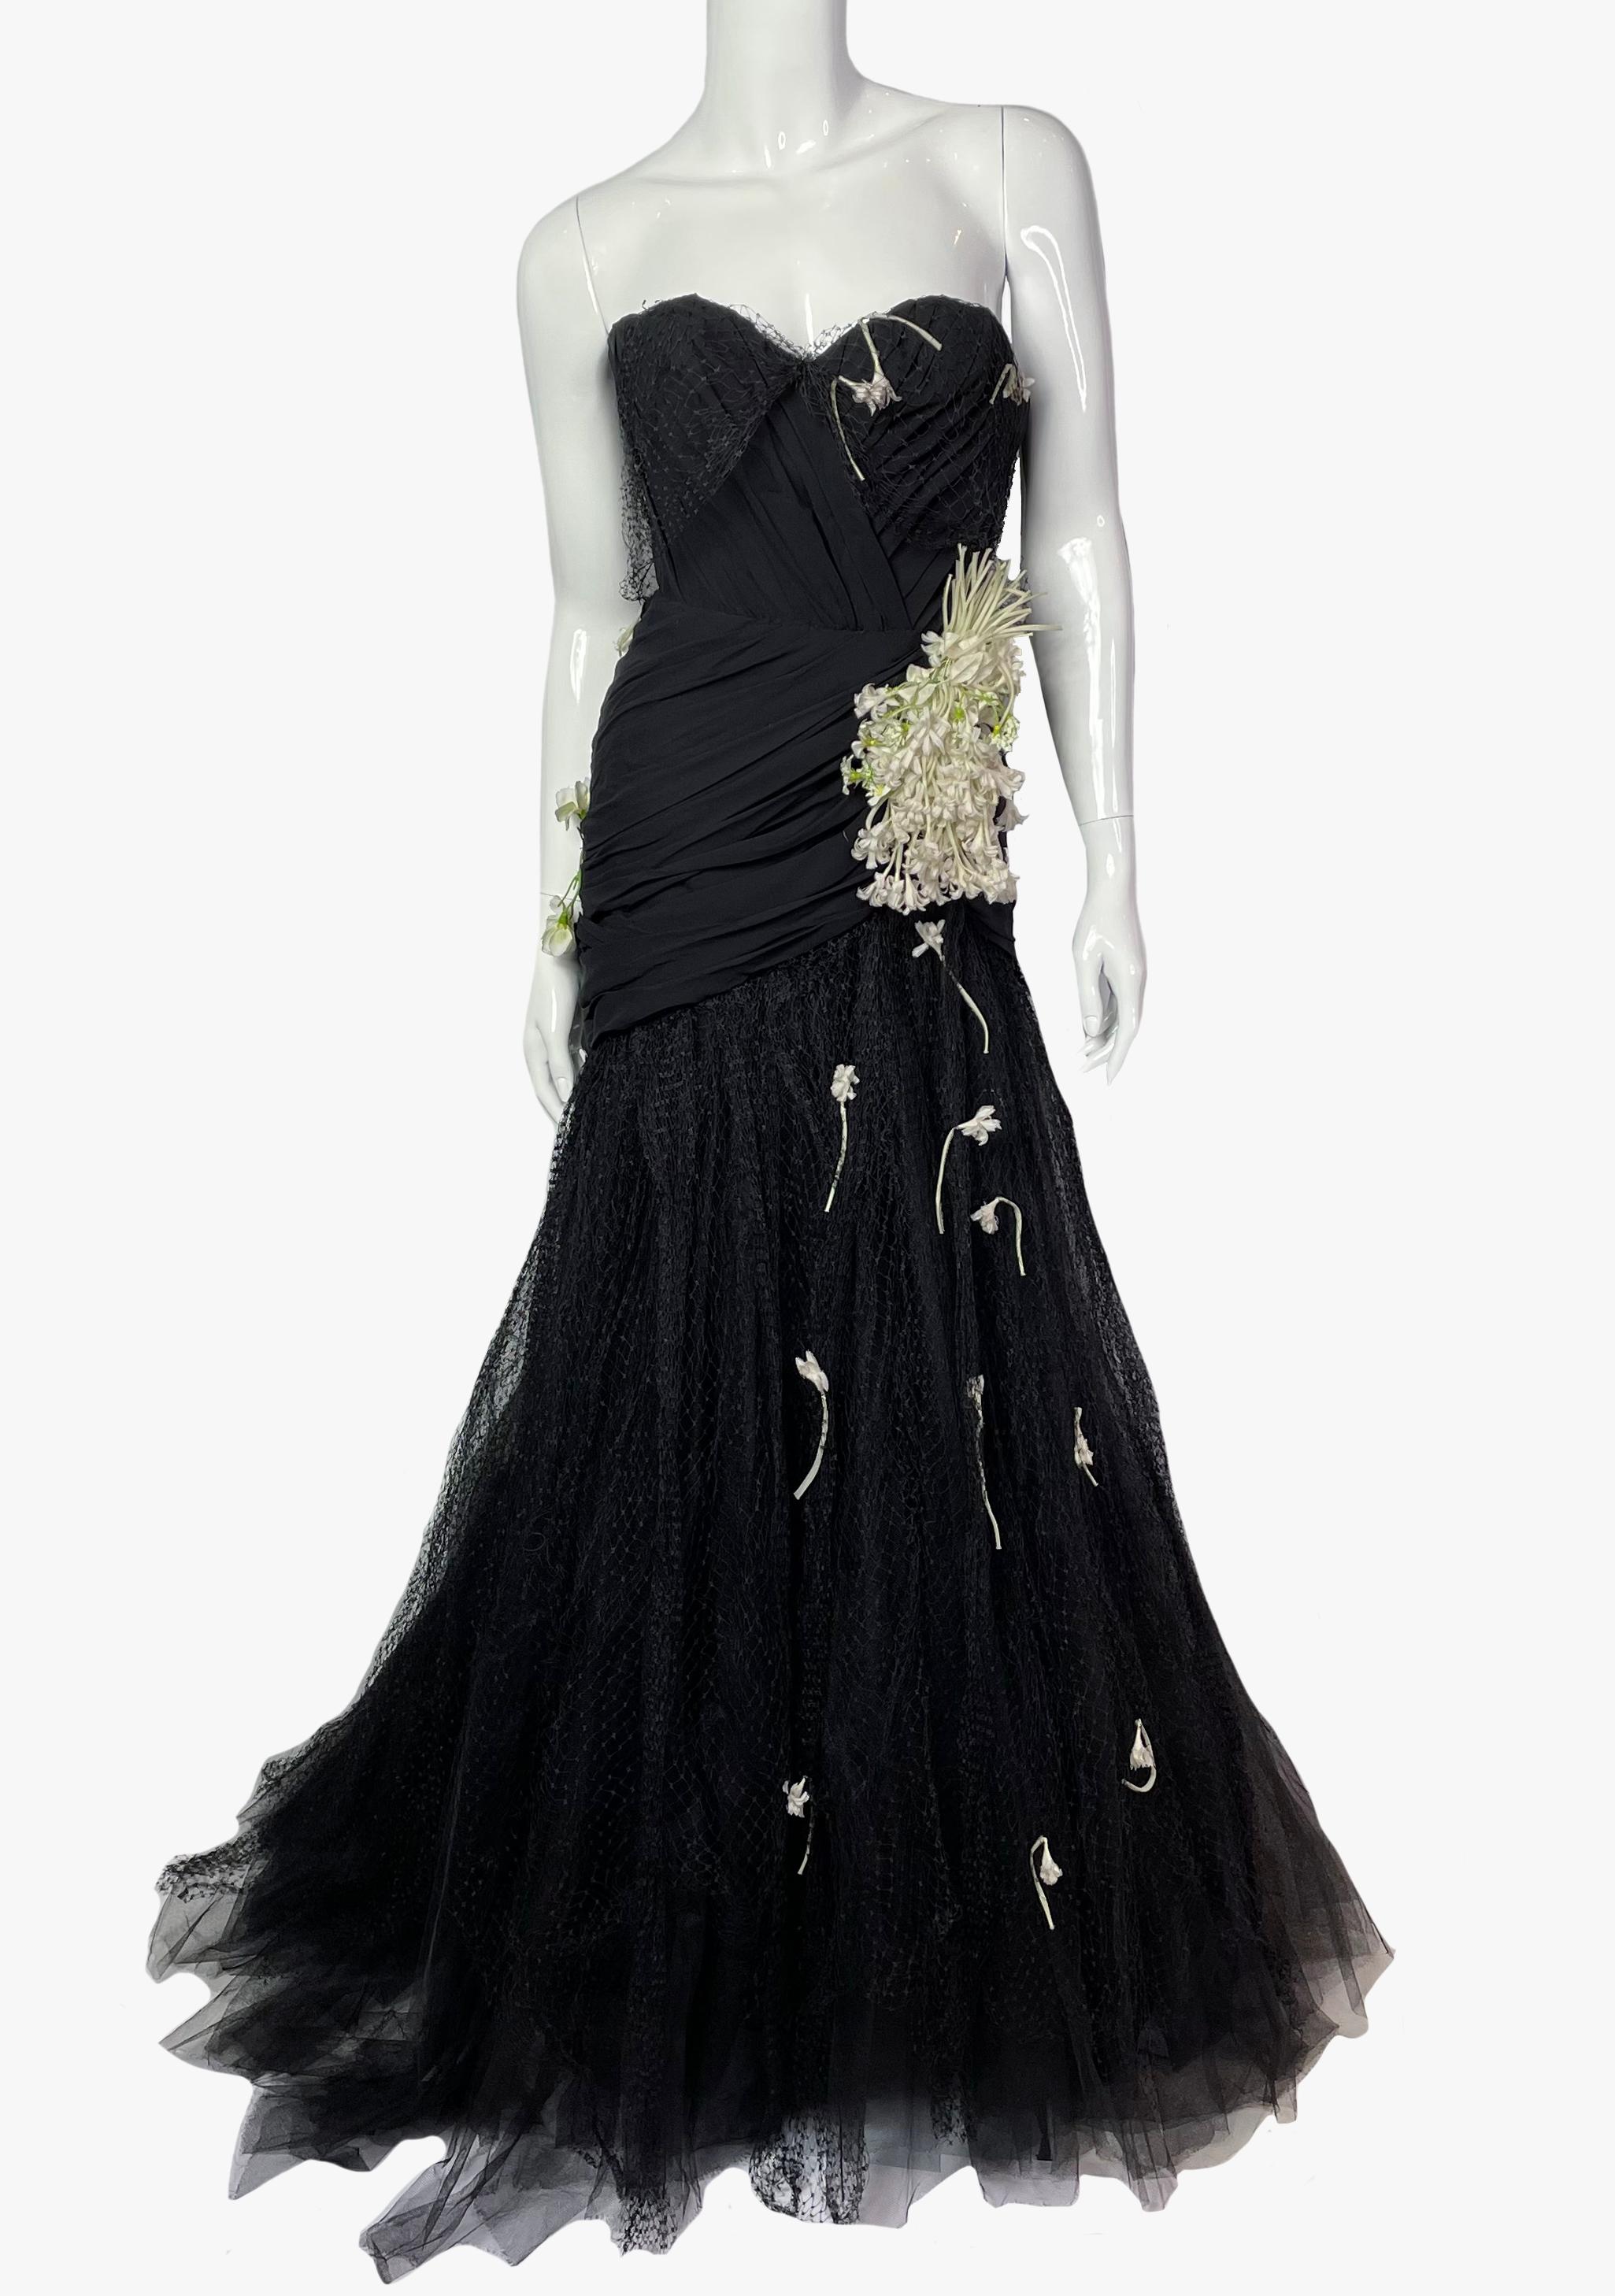 Black Tan Giudicelli vintage bustier black couture gown, 1980s For Sale